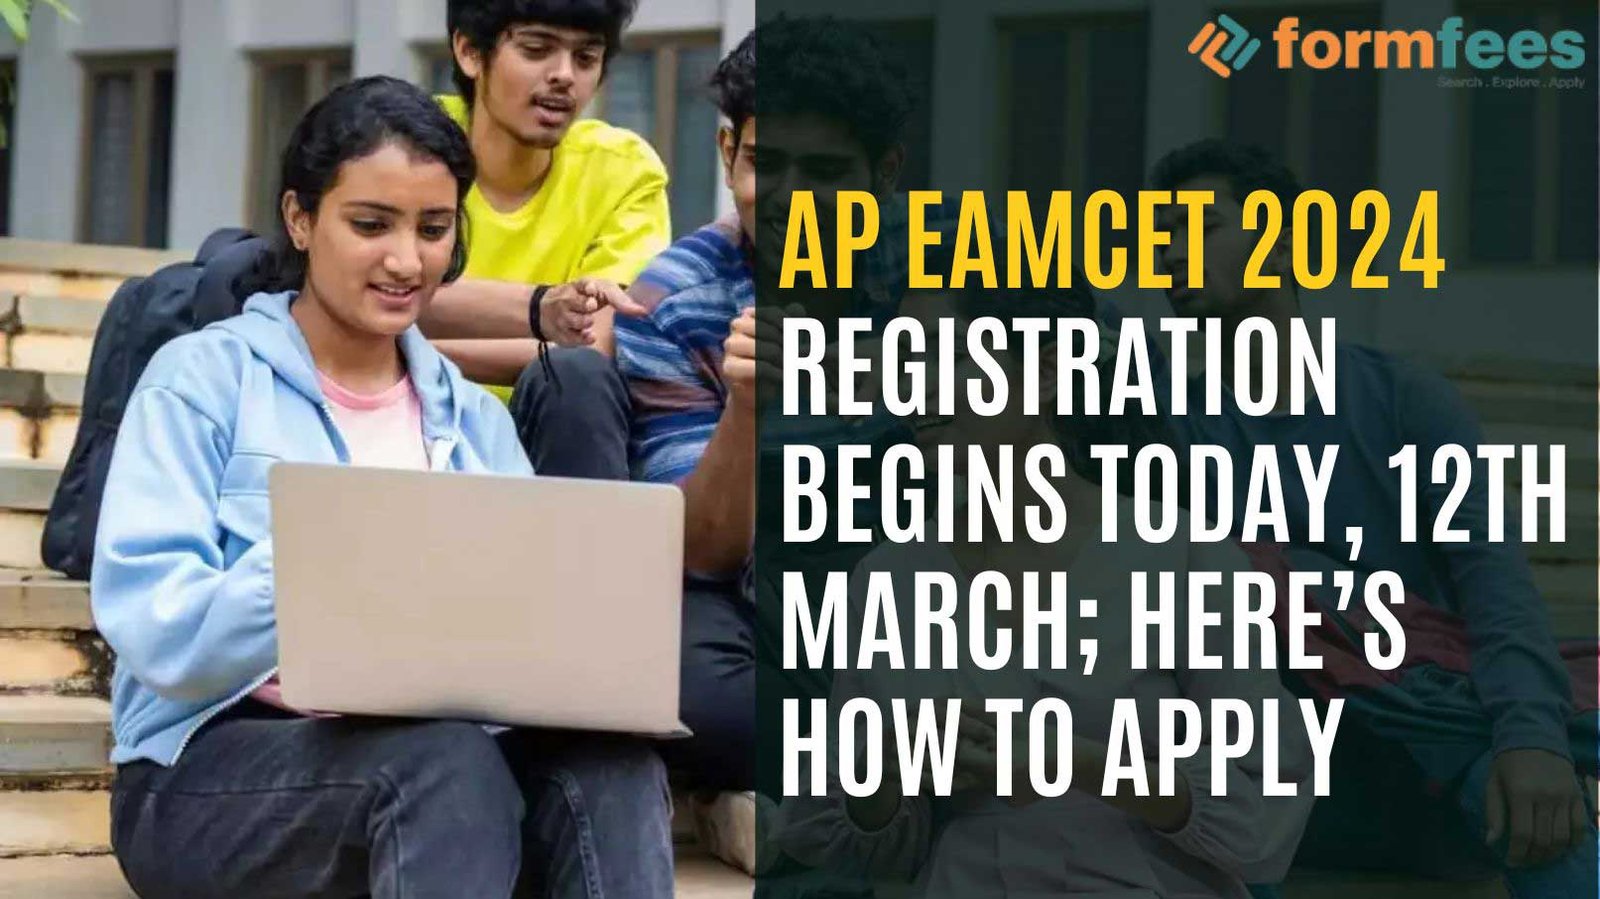 AP EAMCET 2024 Registration Begins Today, 12th March; Here’s How to Apply